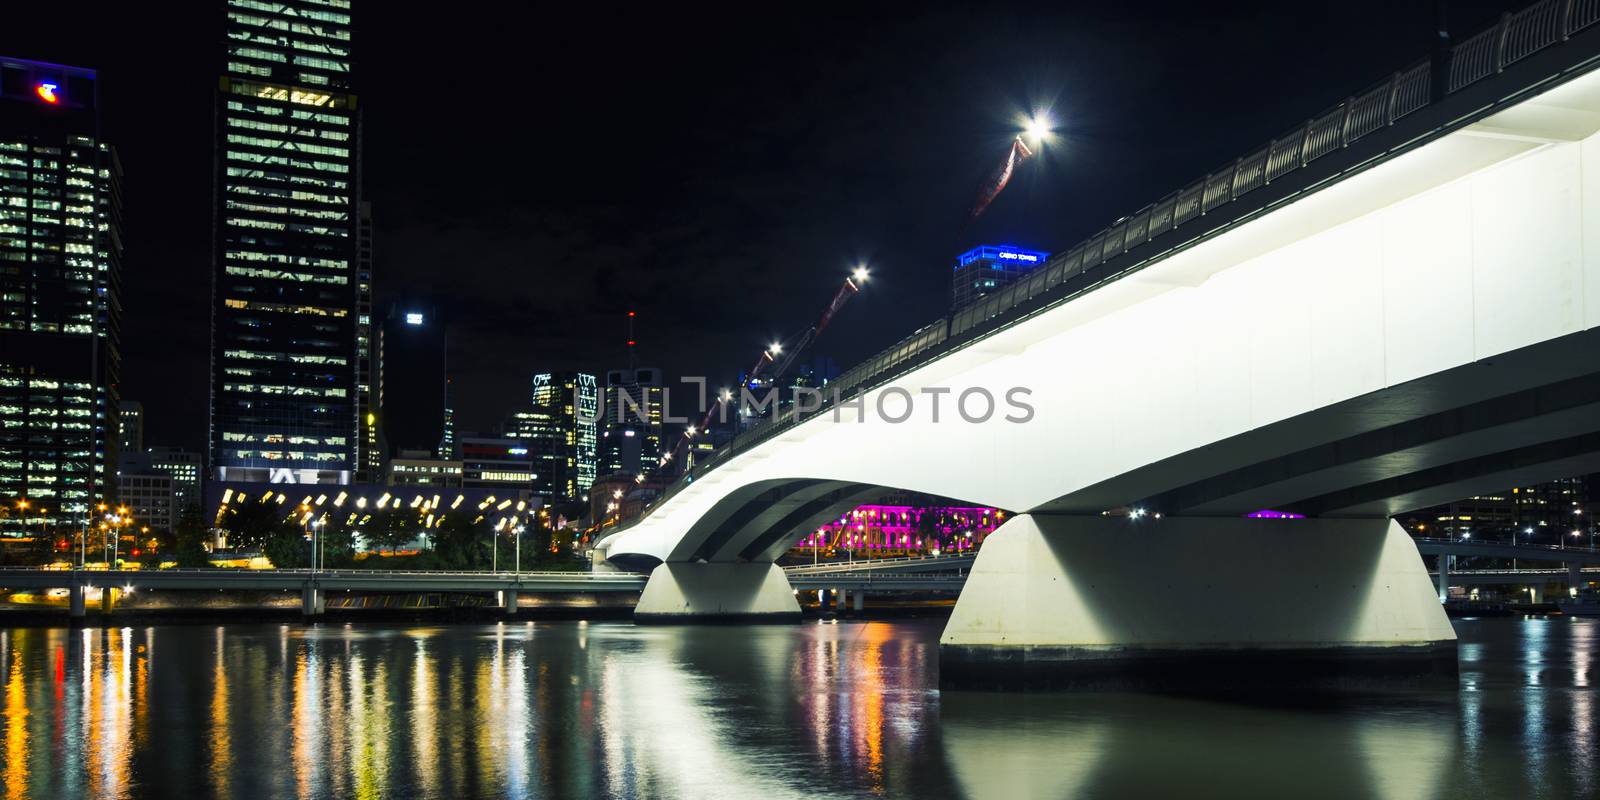 Brisbane, Australia - Tuesday 23rd June, 2015: View of Victoria Bridge and Brisbane City at night from Southbank on Tuesday the 23rd June 2015. by artistrobd